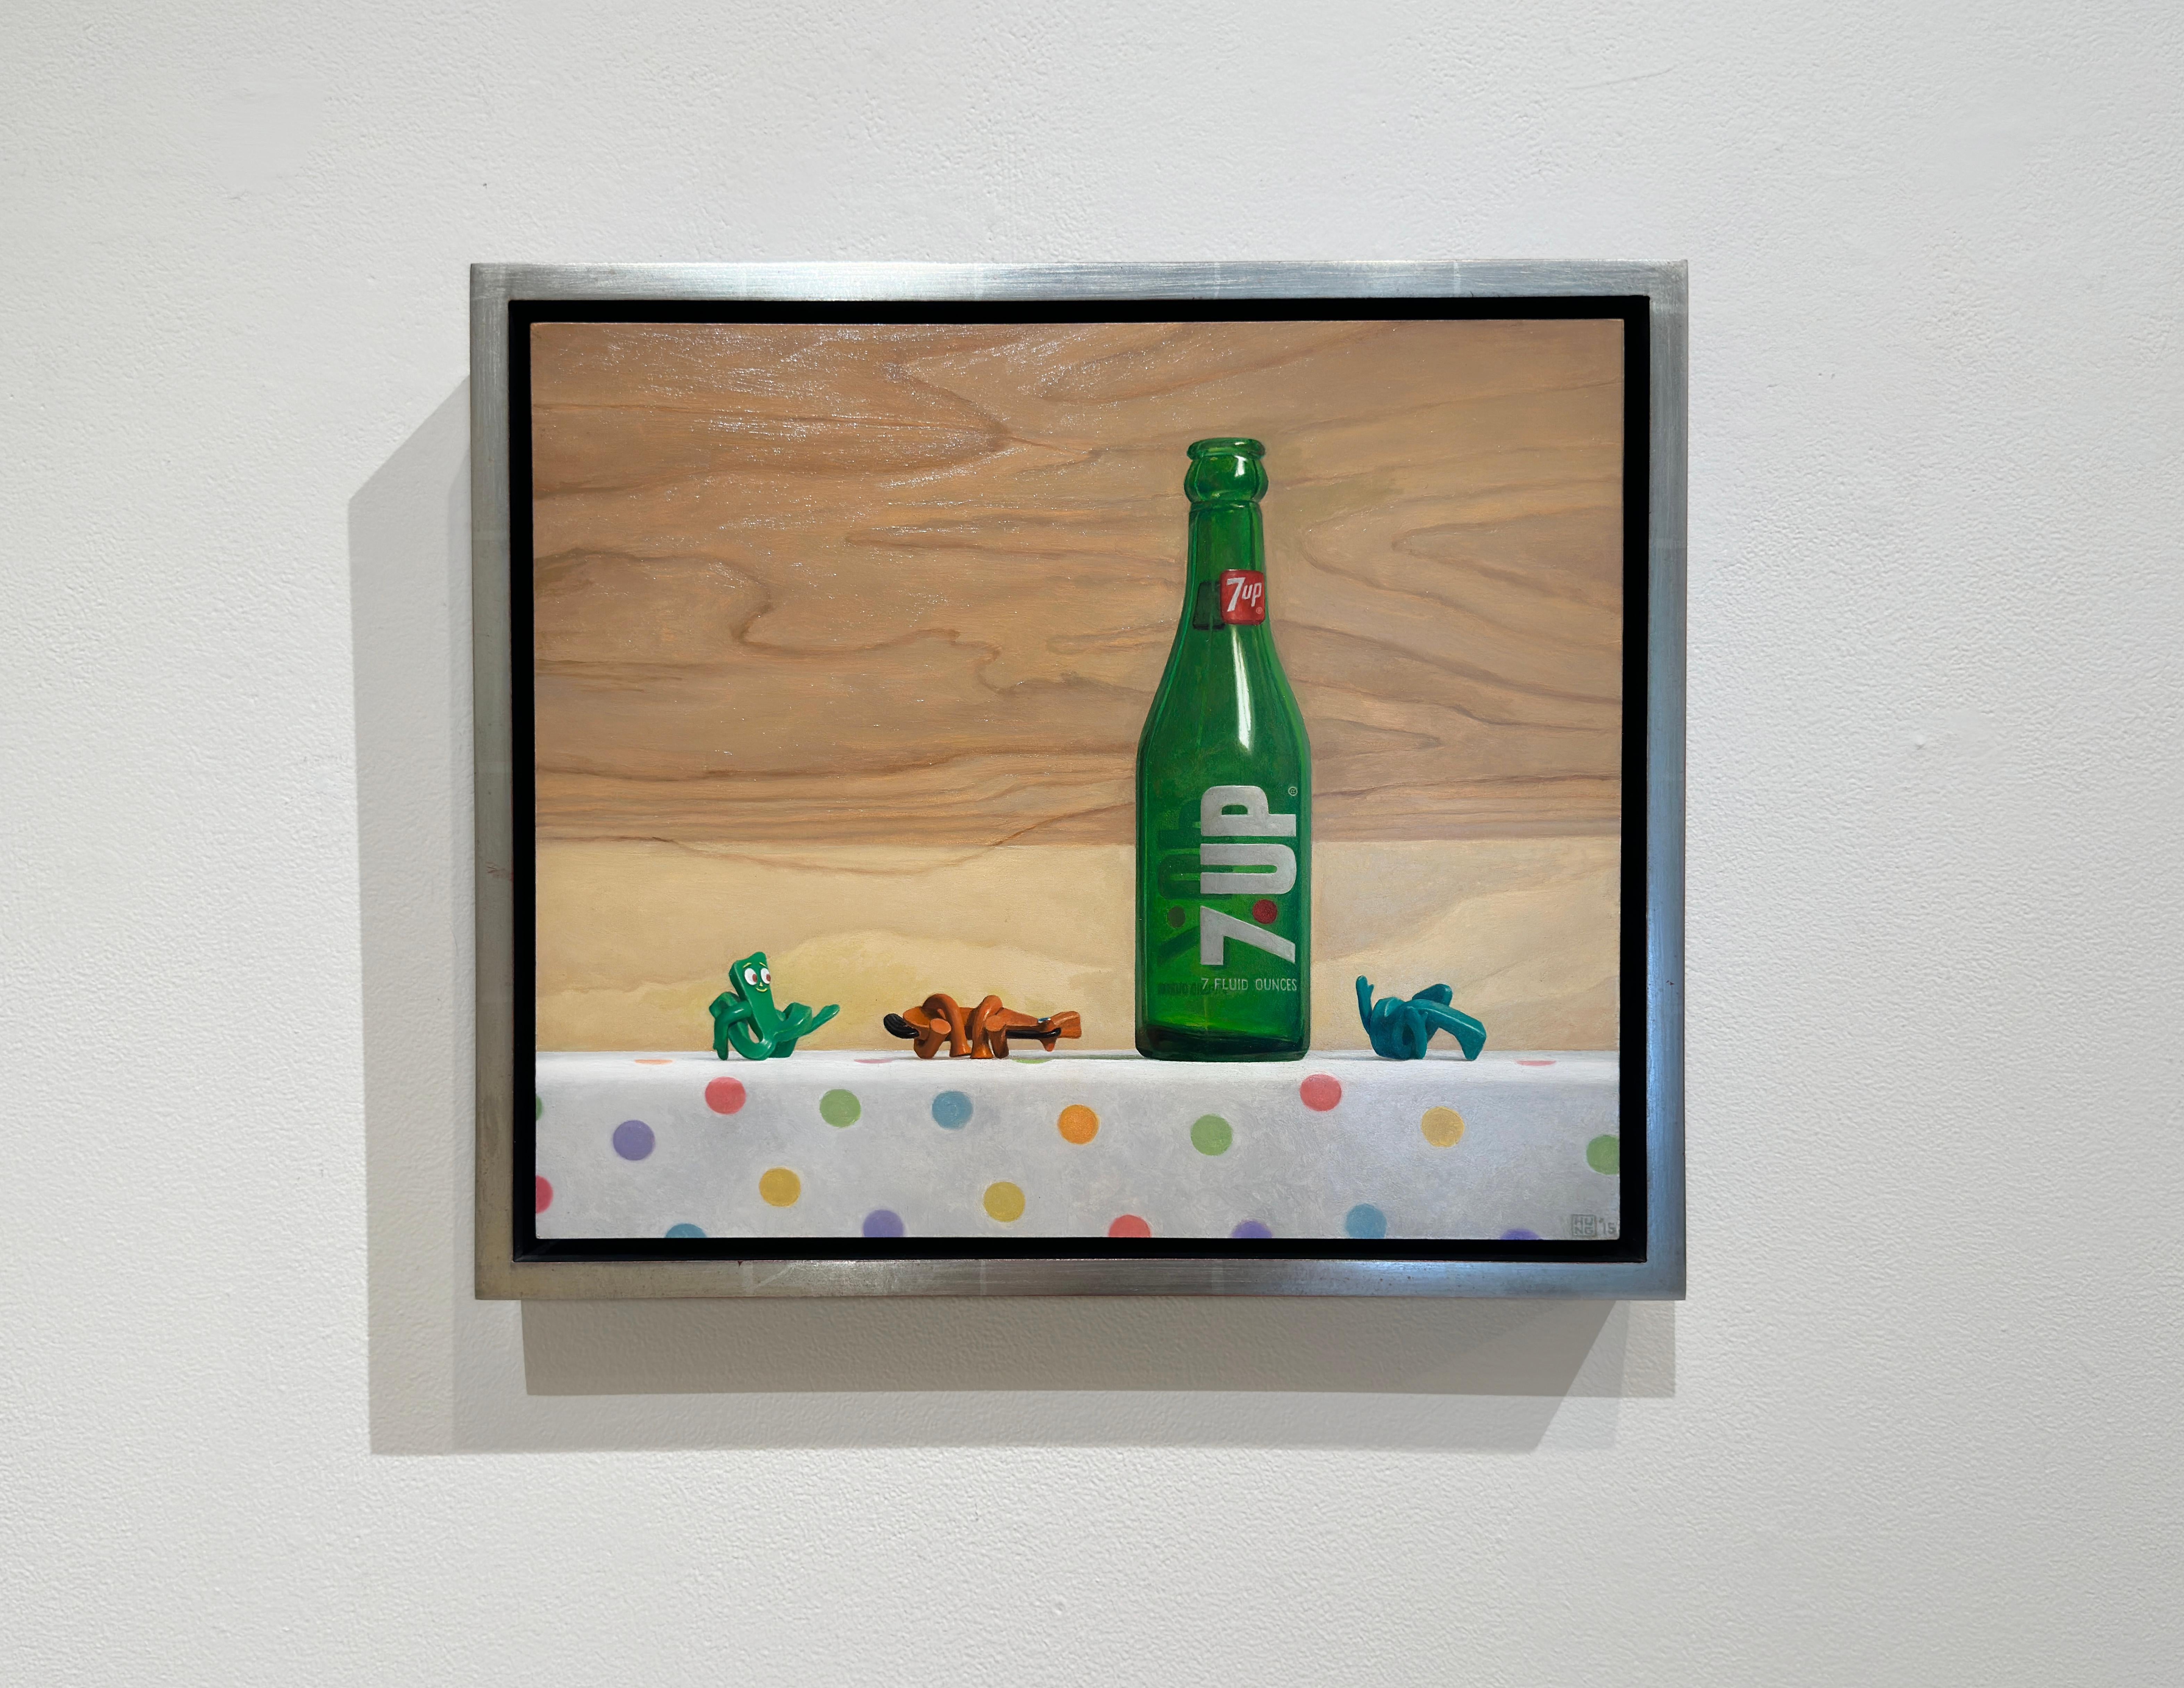 7-UP & PRETZELS - Hyperrealism / Realism / Contemporary Still Life / Gumby - Painting by Samuel Hung